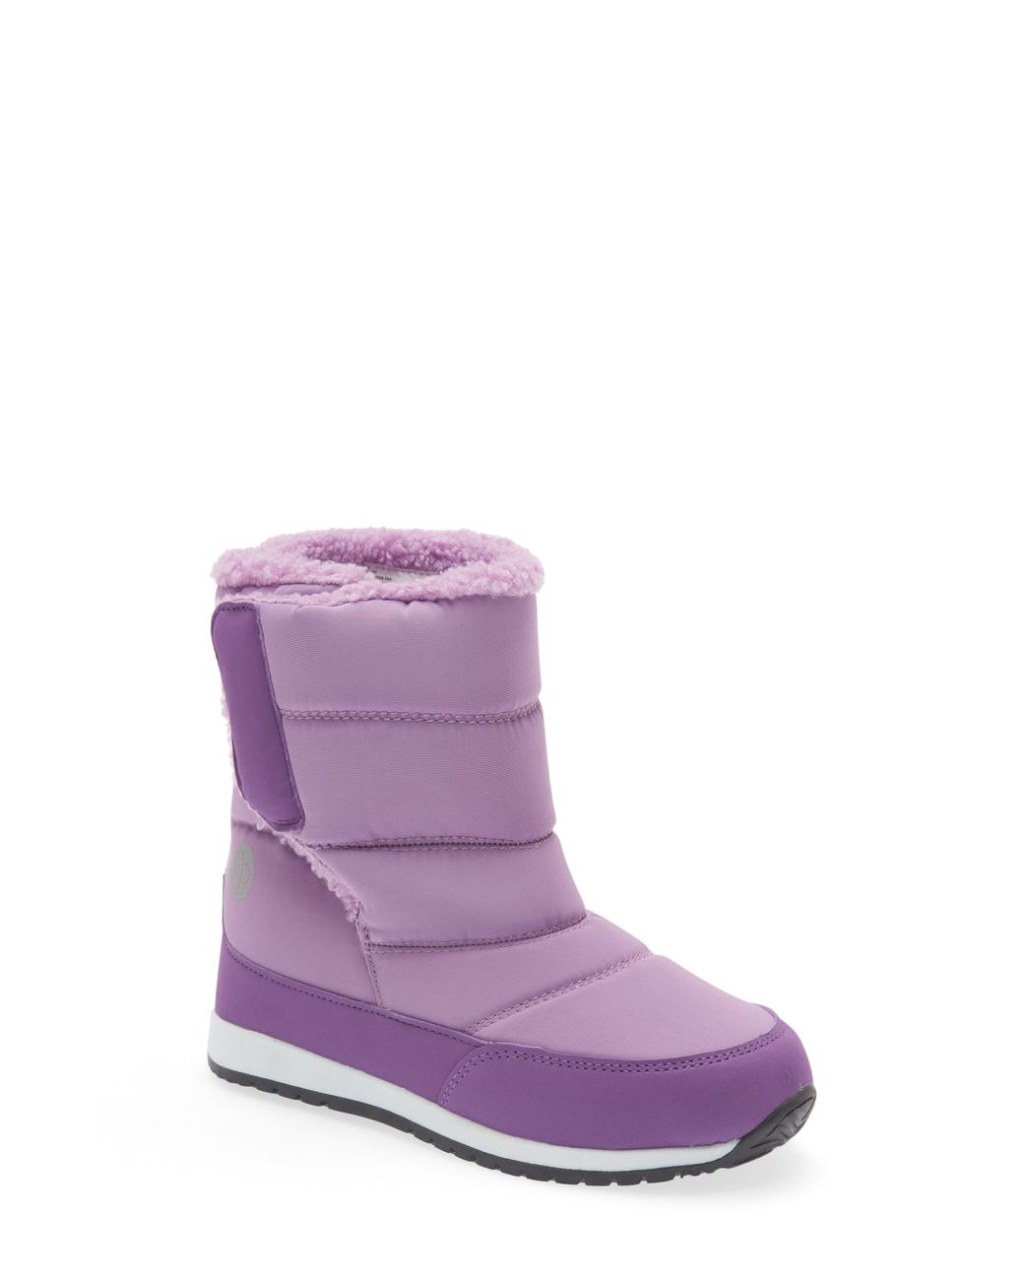 Picture of: Zella Kids’ Quilted Fleece Lined Snow Boot in Purple  Lyst